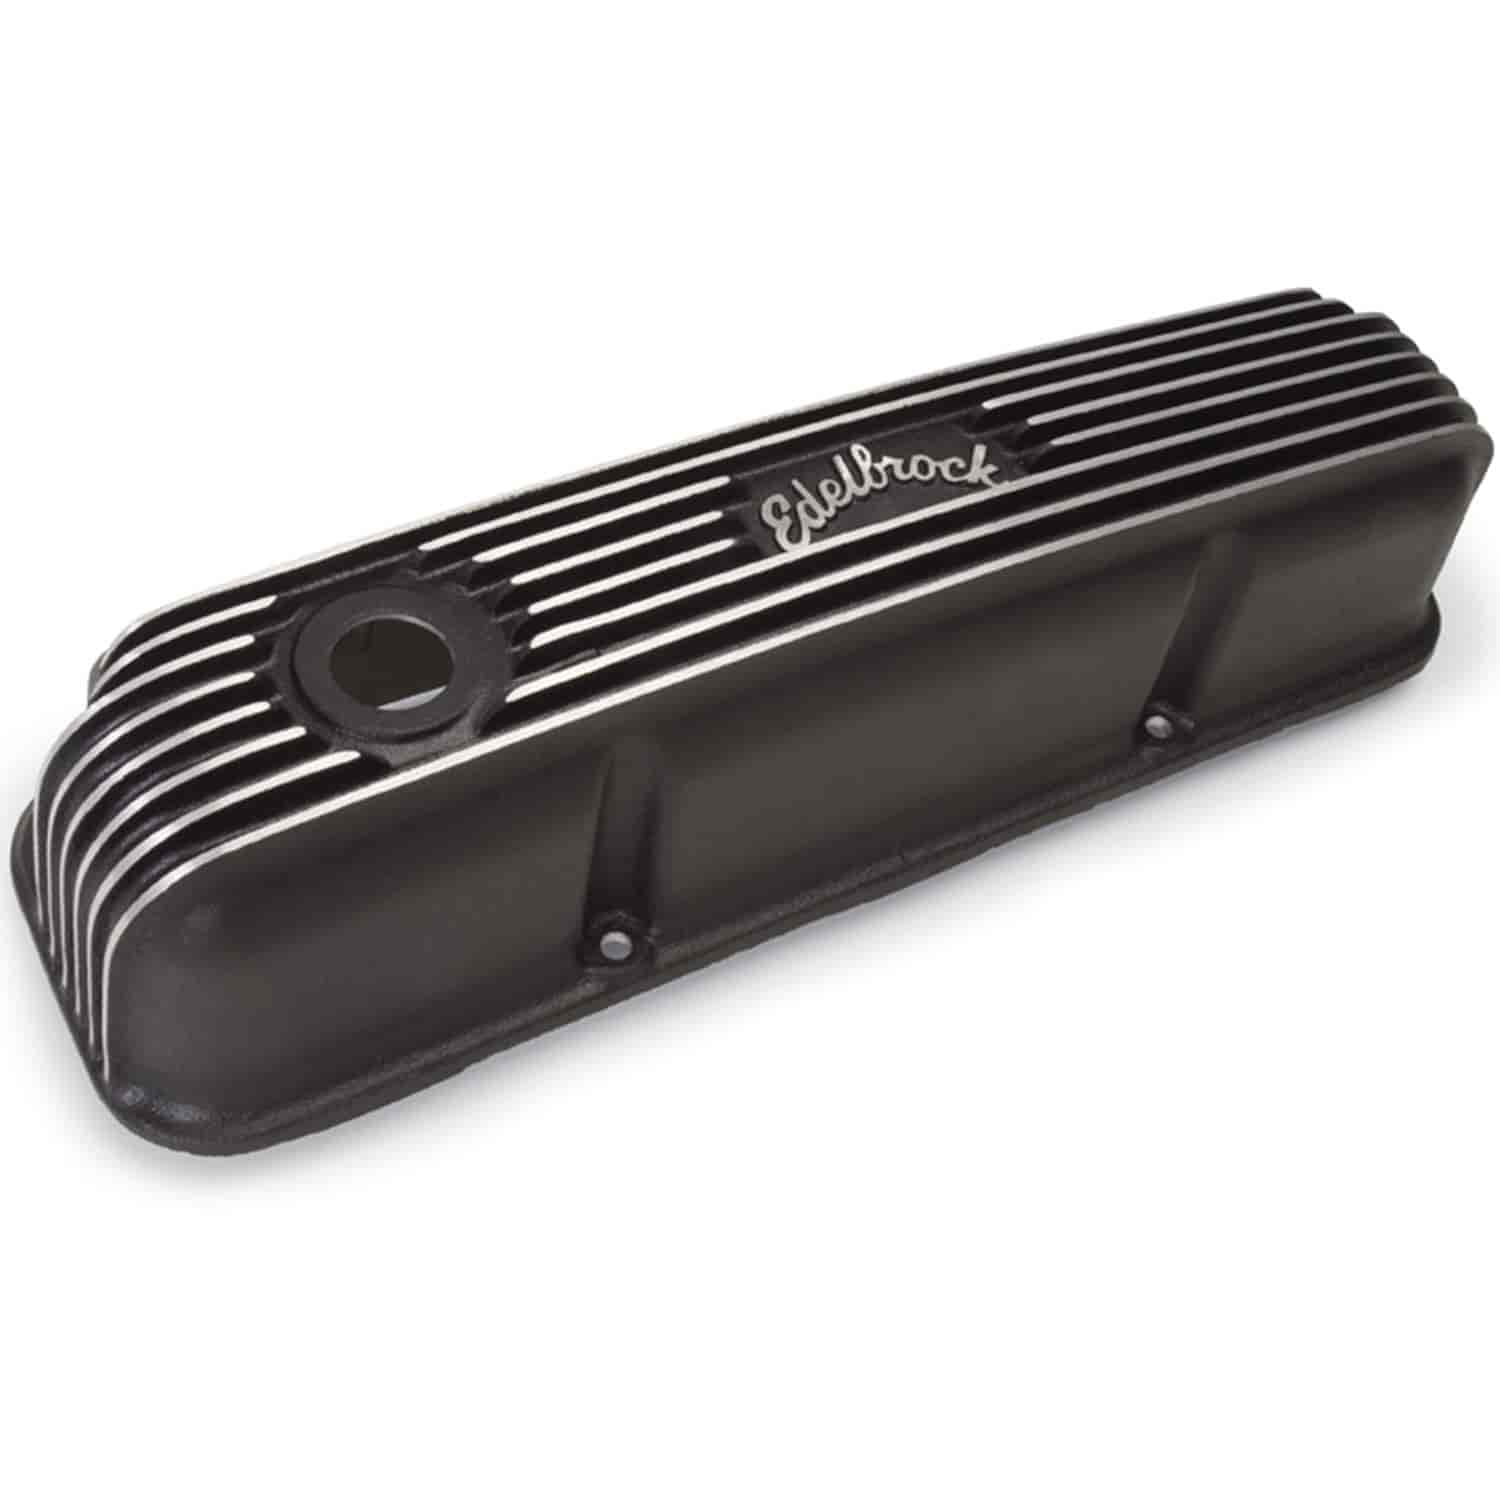 Classic Finned Valve Covers for 1958-1976 Ford FE with Black Powder Coated Finish